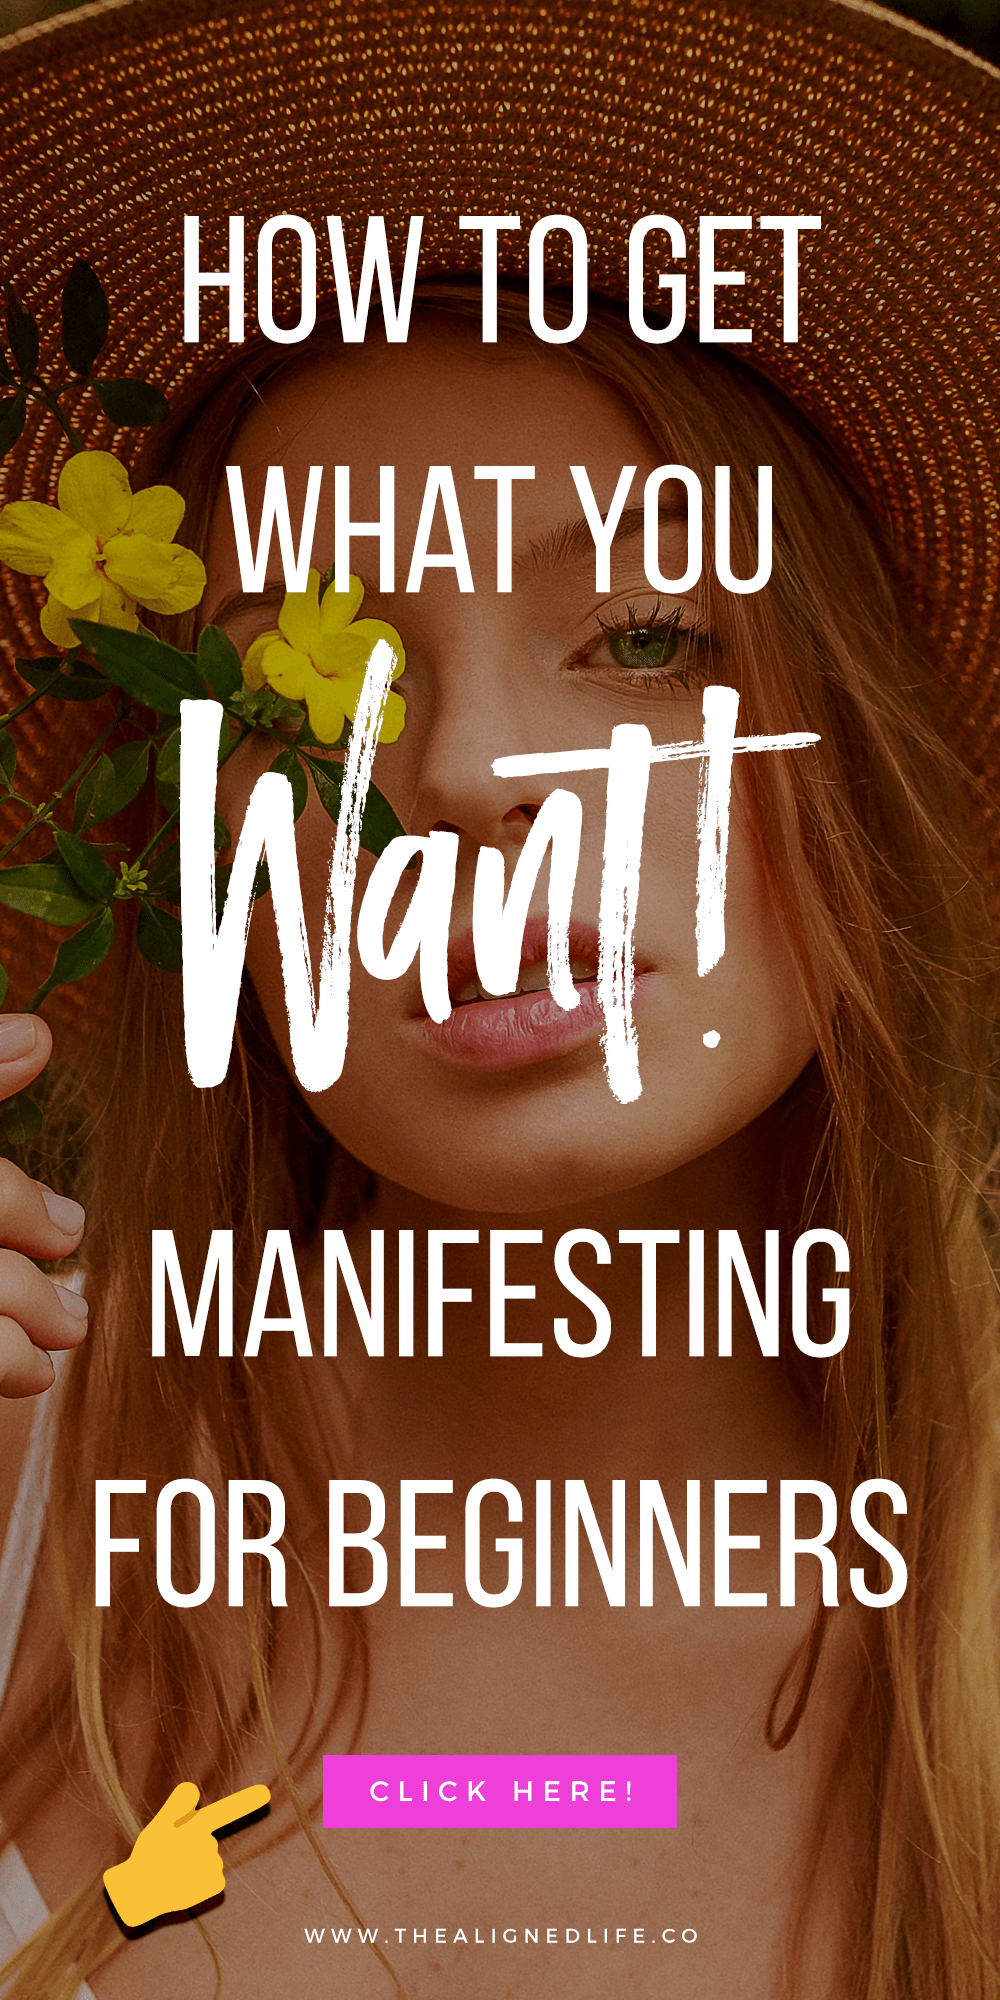 Manifesting For Beginners: How To Get What You Really Want